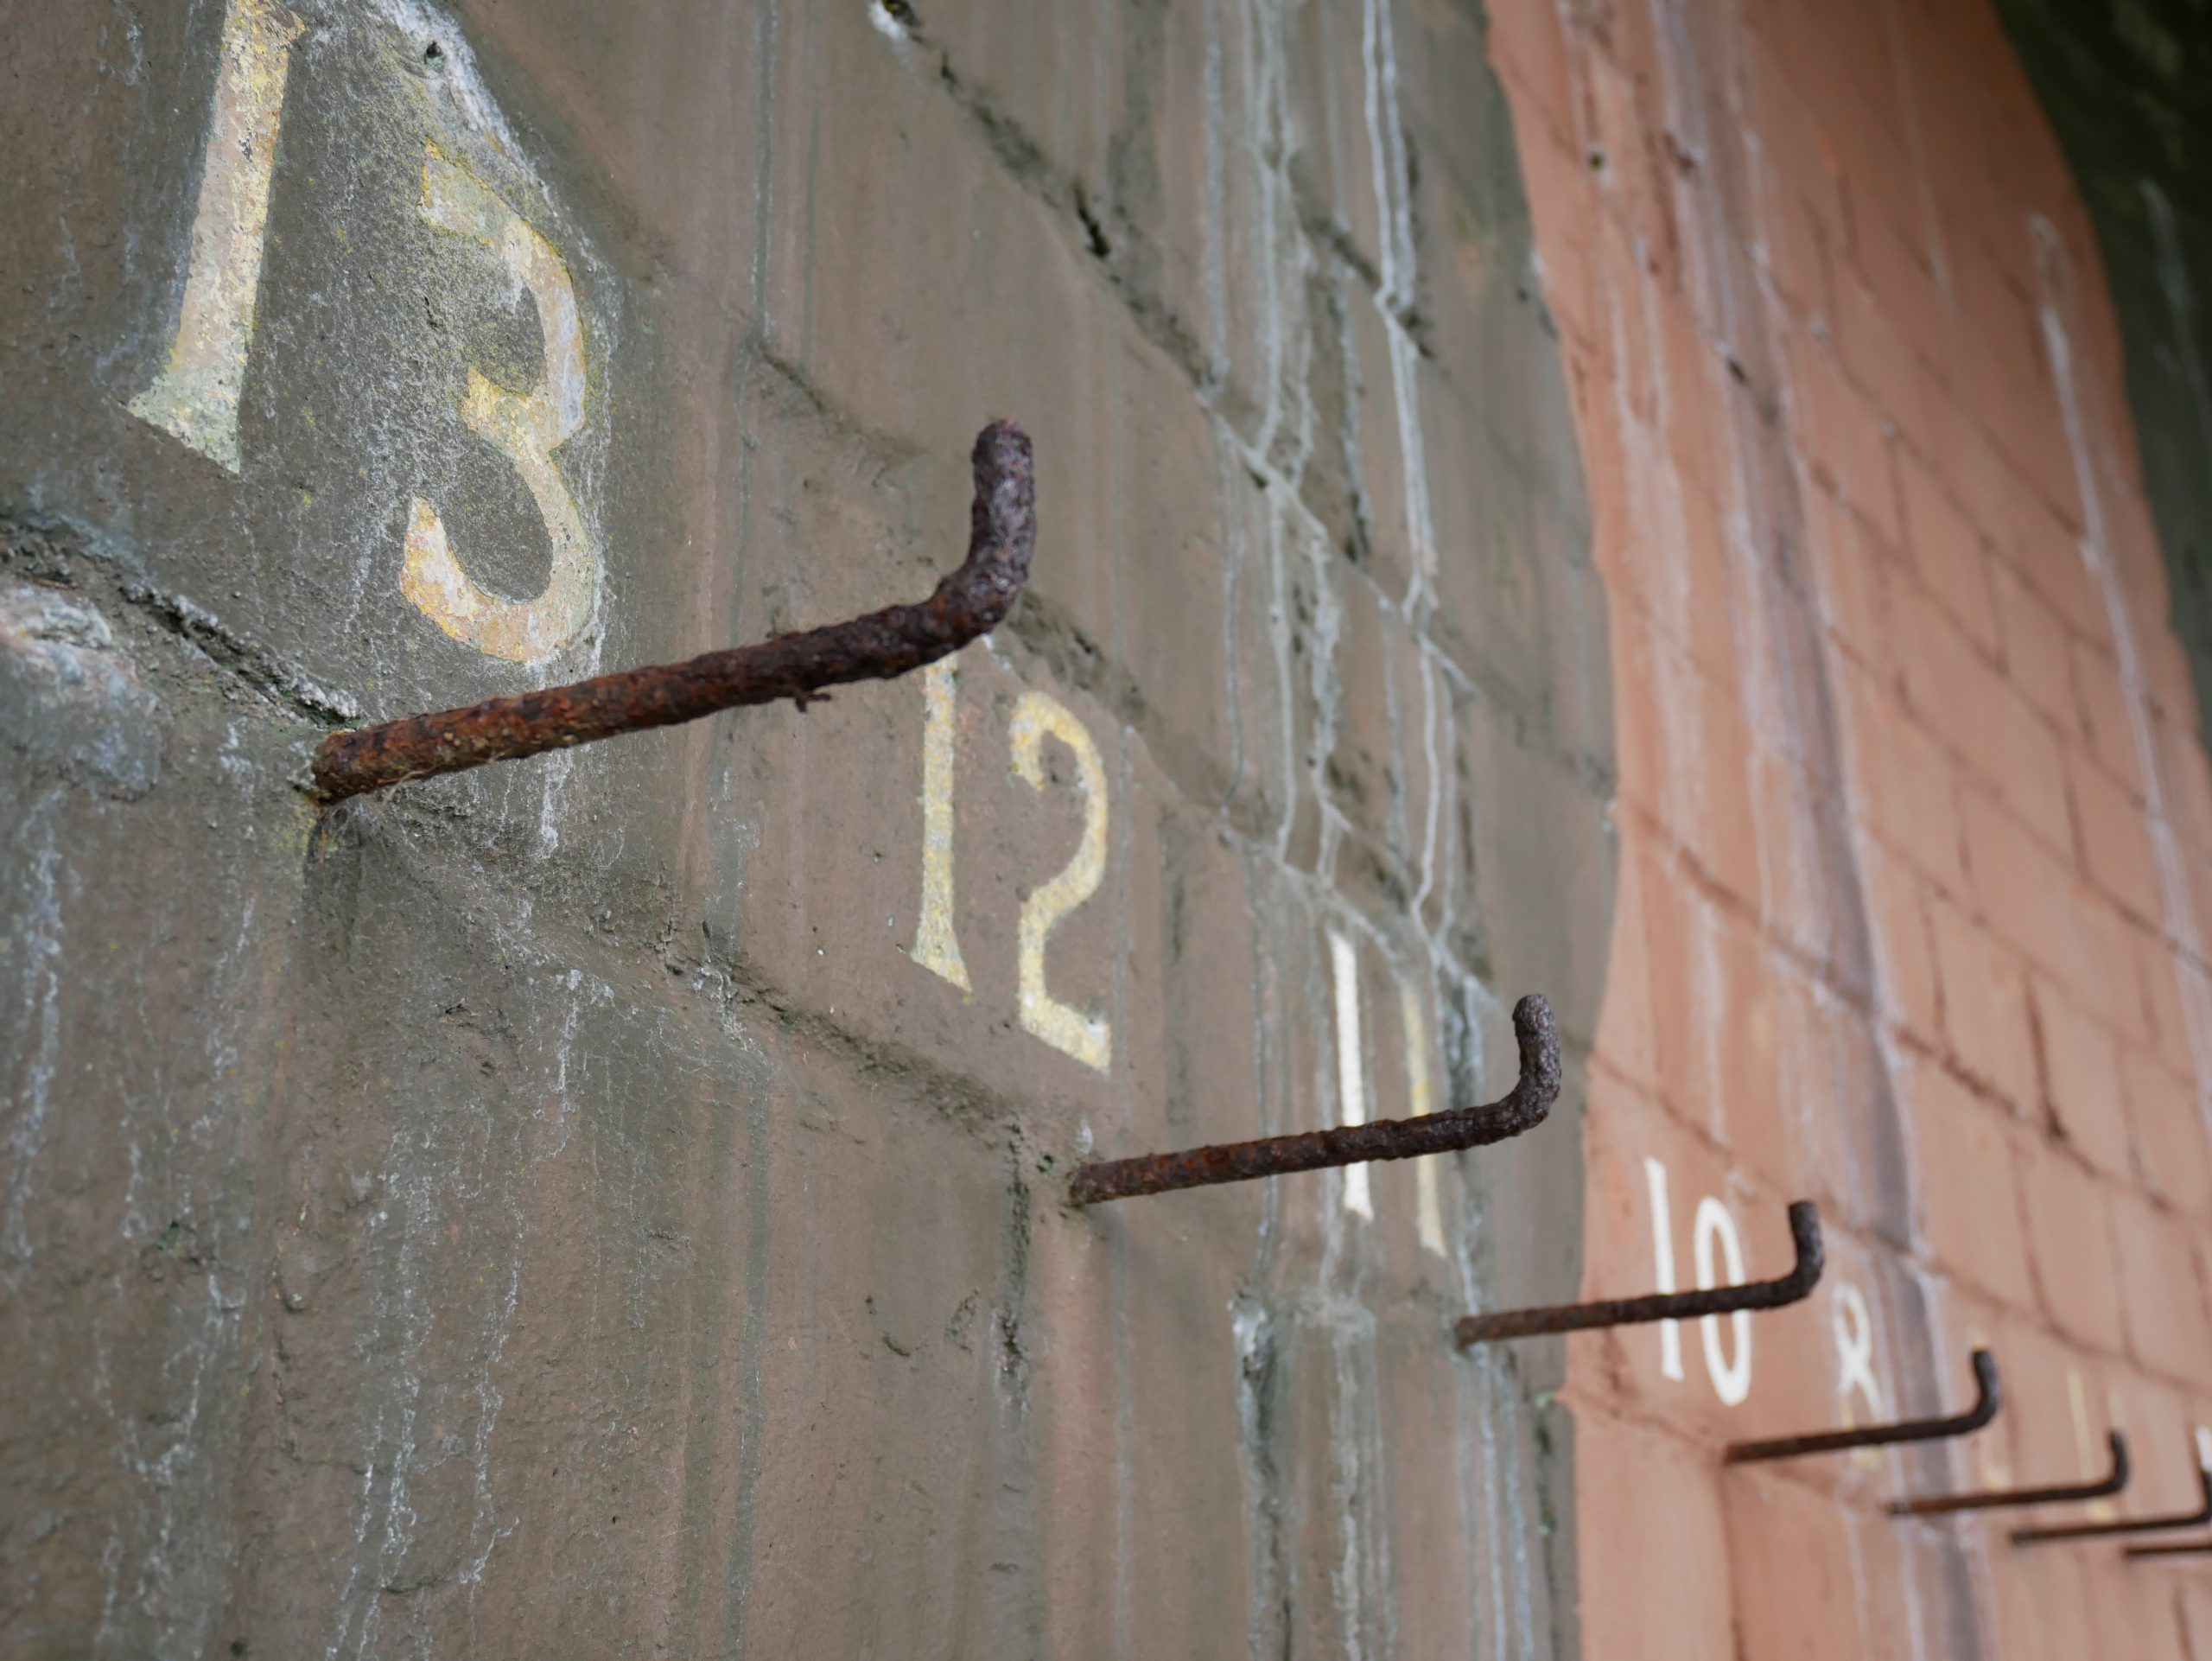 Pegs in a Military Barracks, ending in the number 13